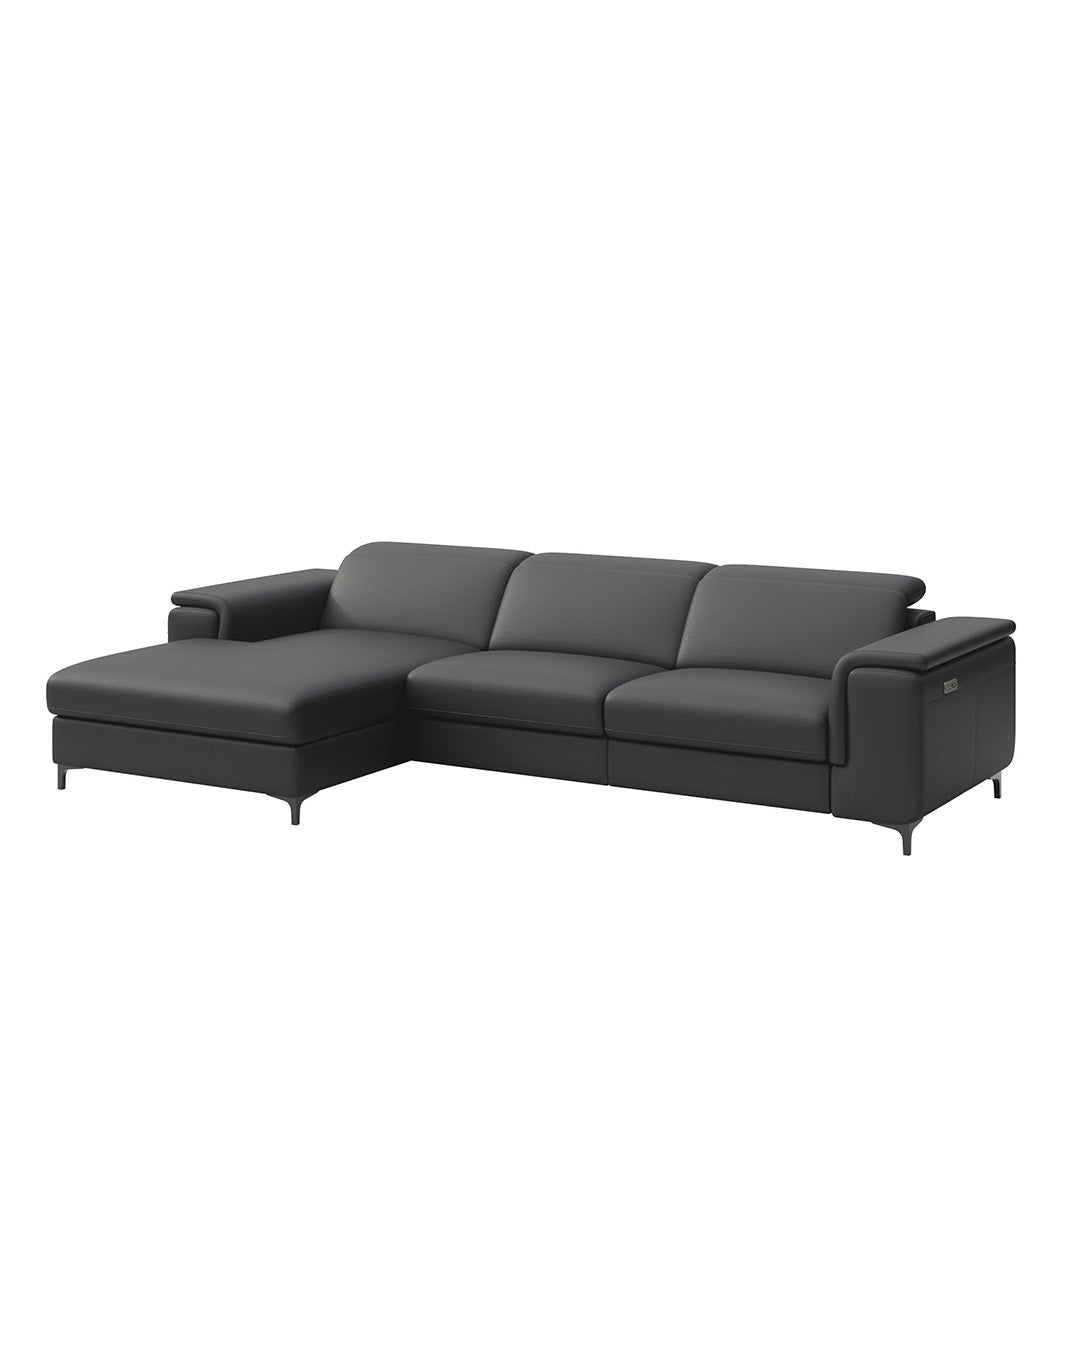 BRITO CHAISE LONGUE SOFA WITH RELAXATION FUNCTION